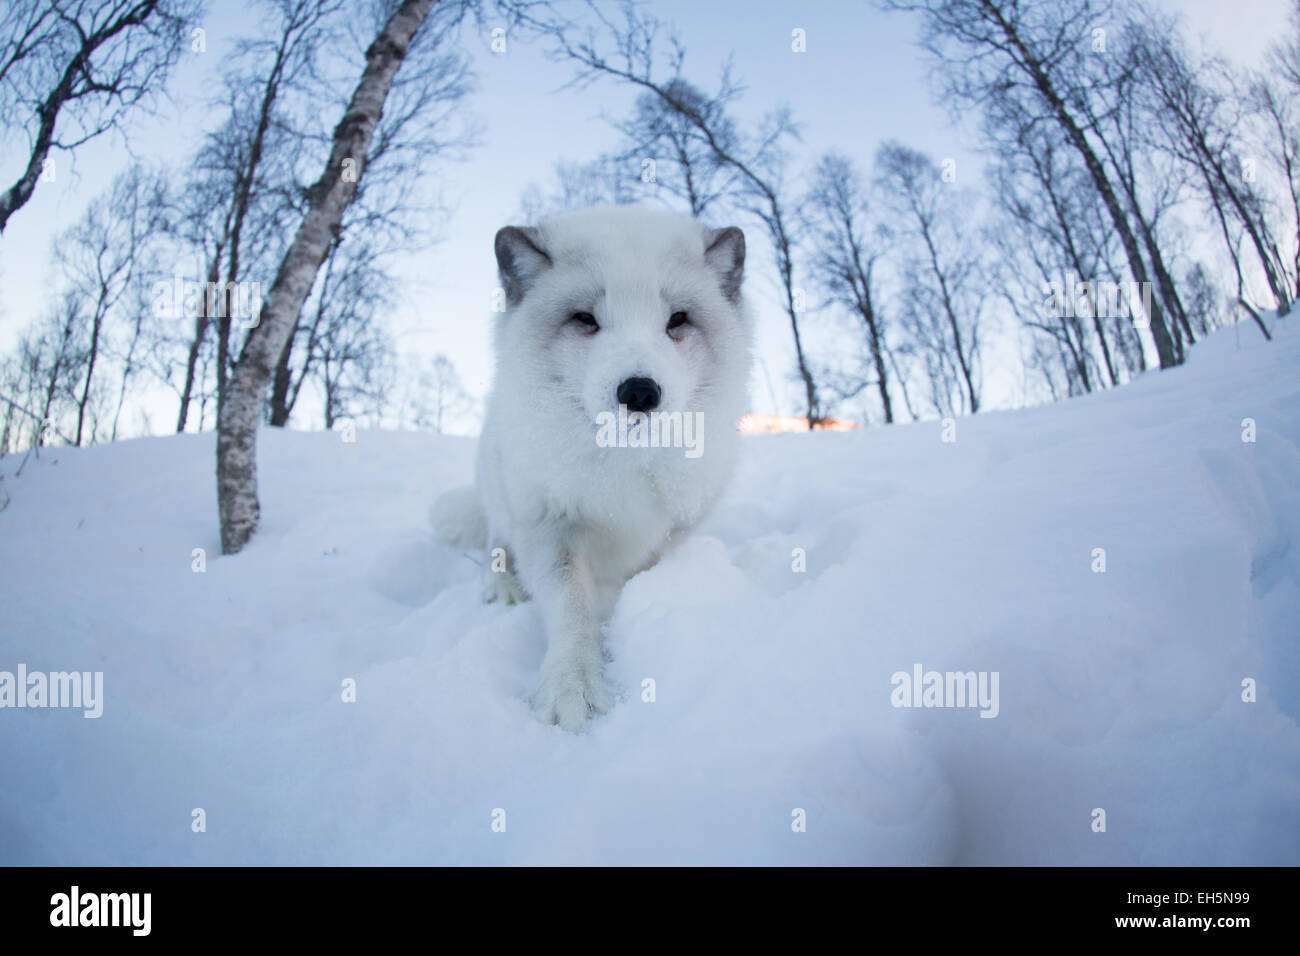 Arctic fox in a snowy forest Stock Photo